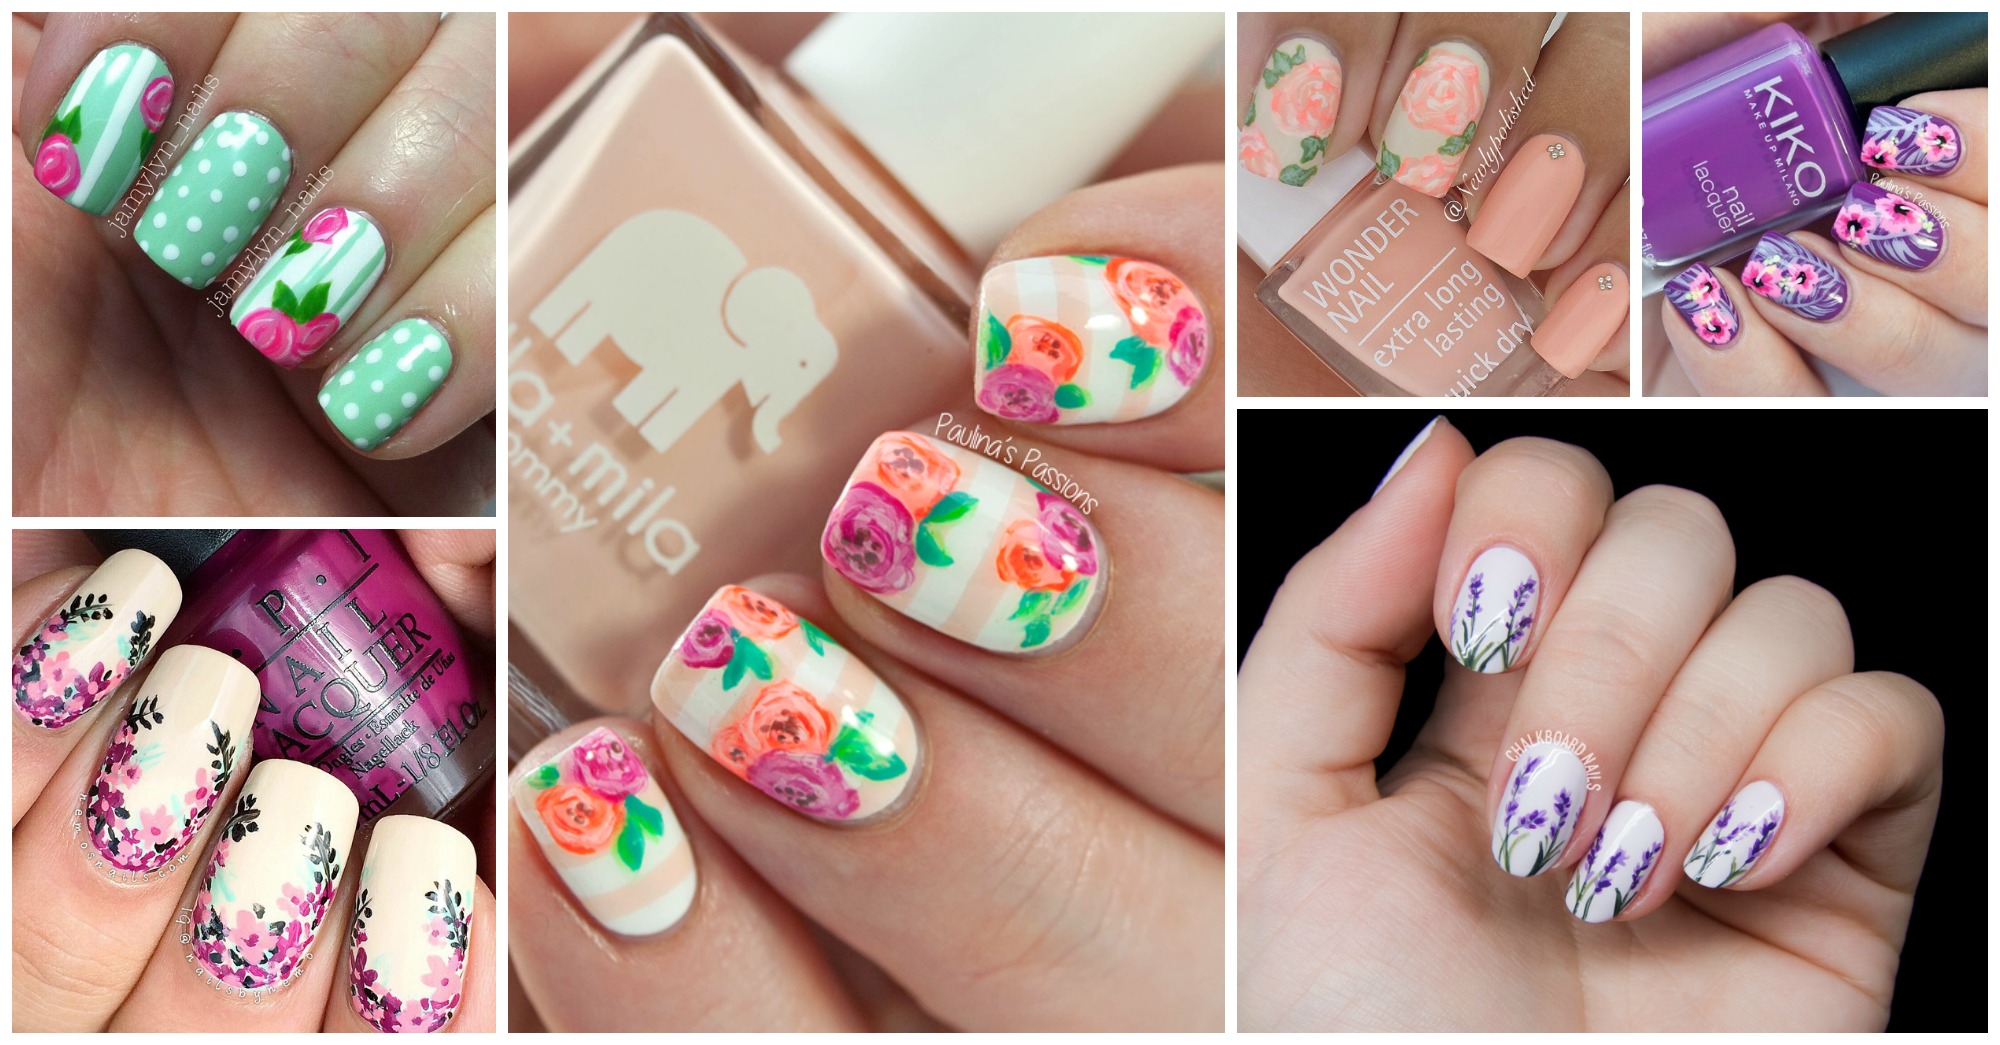 15 Stupendous Floral Nail Designs to Copy This Spring